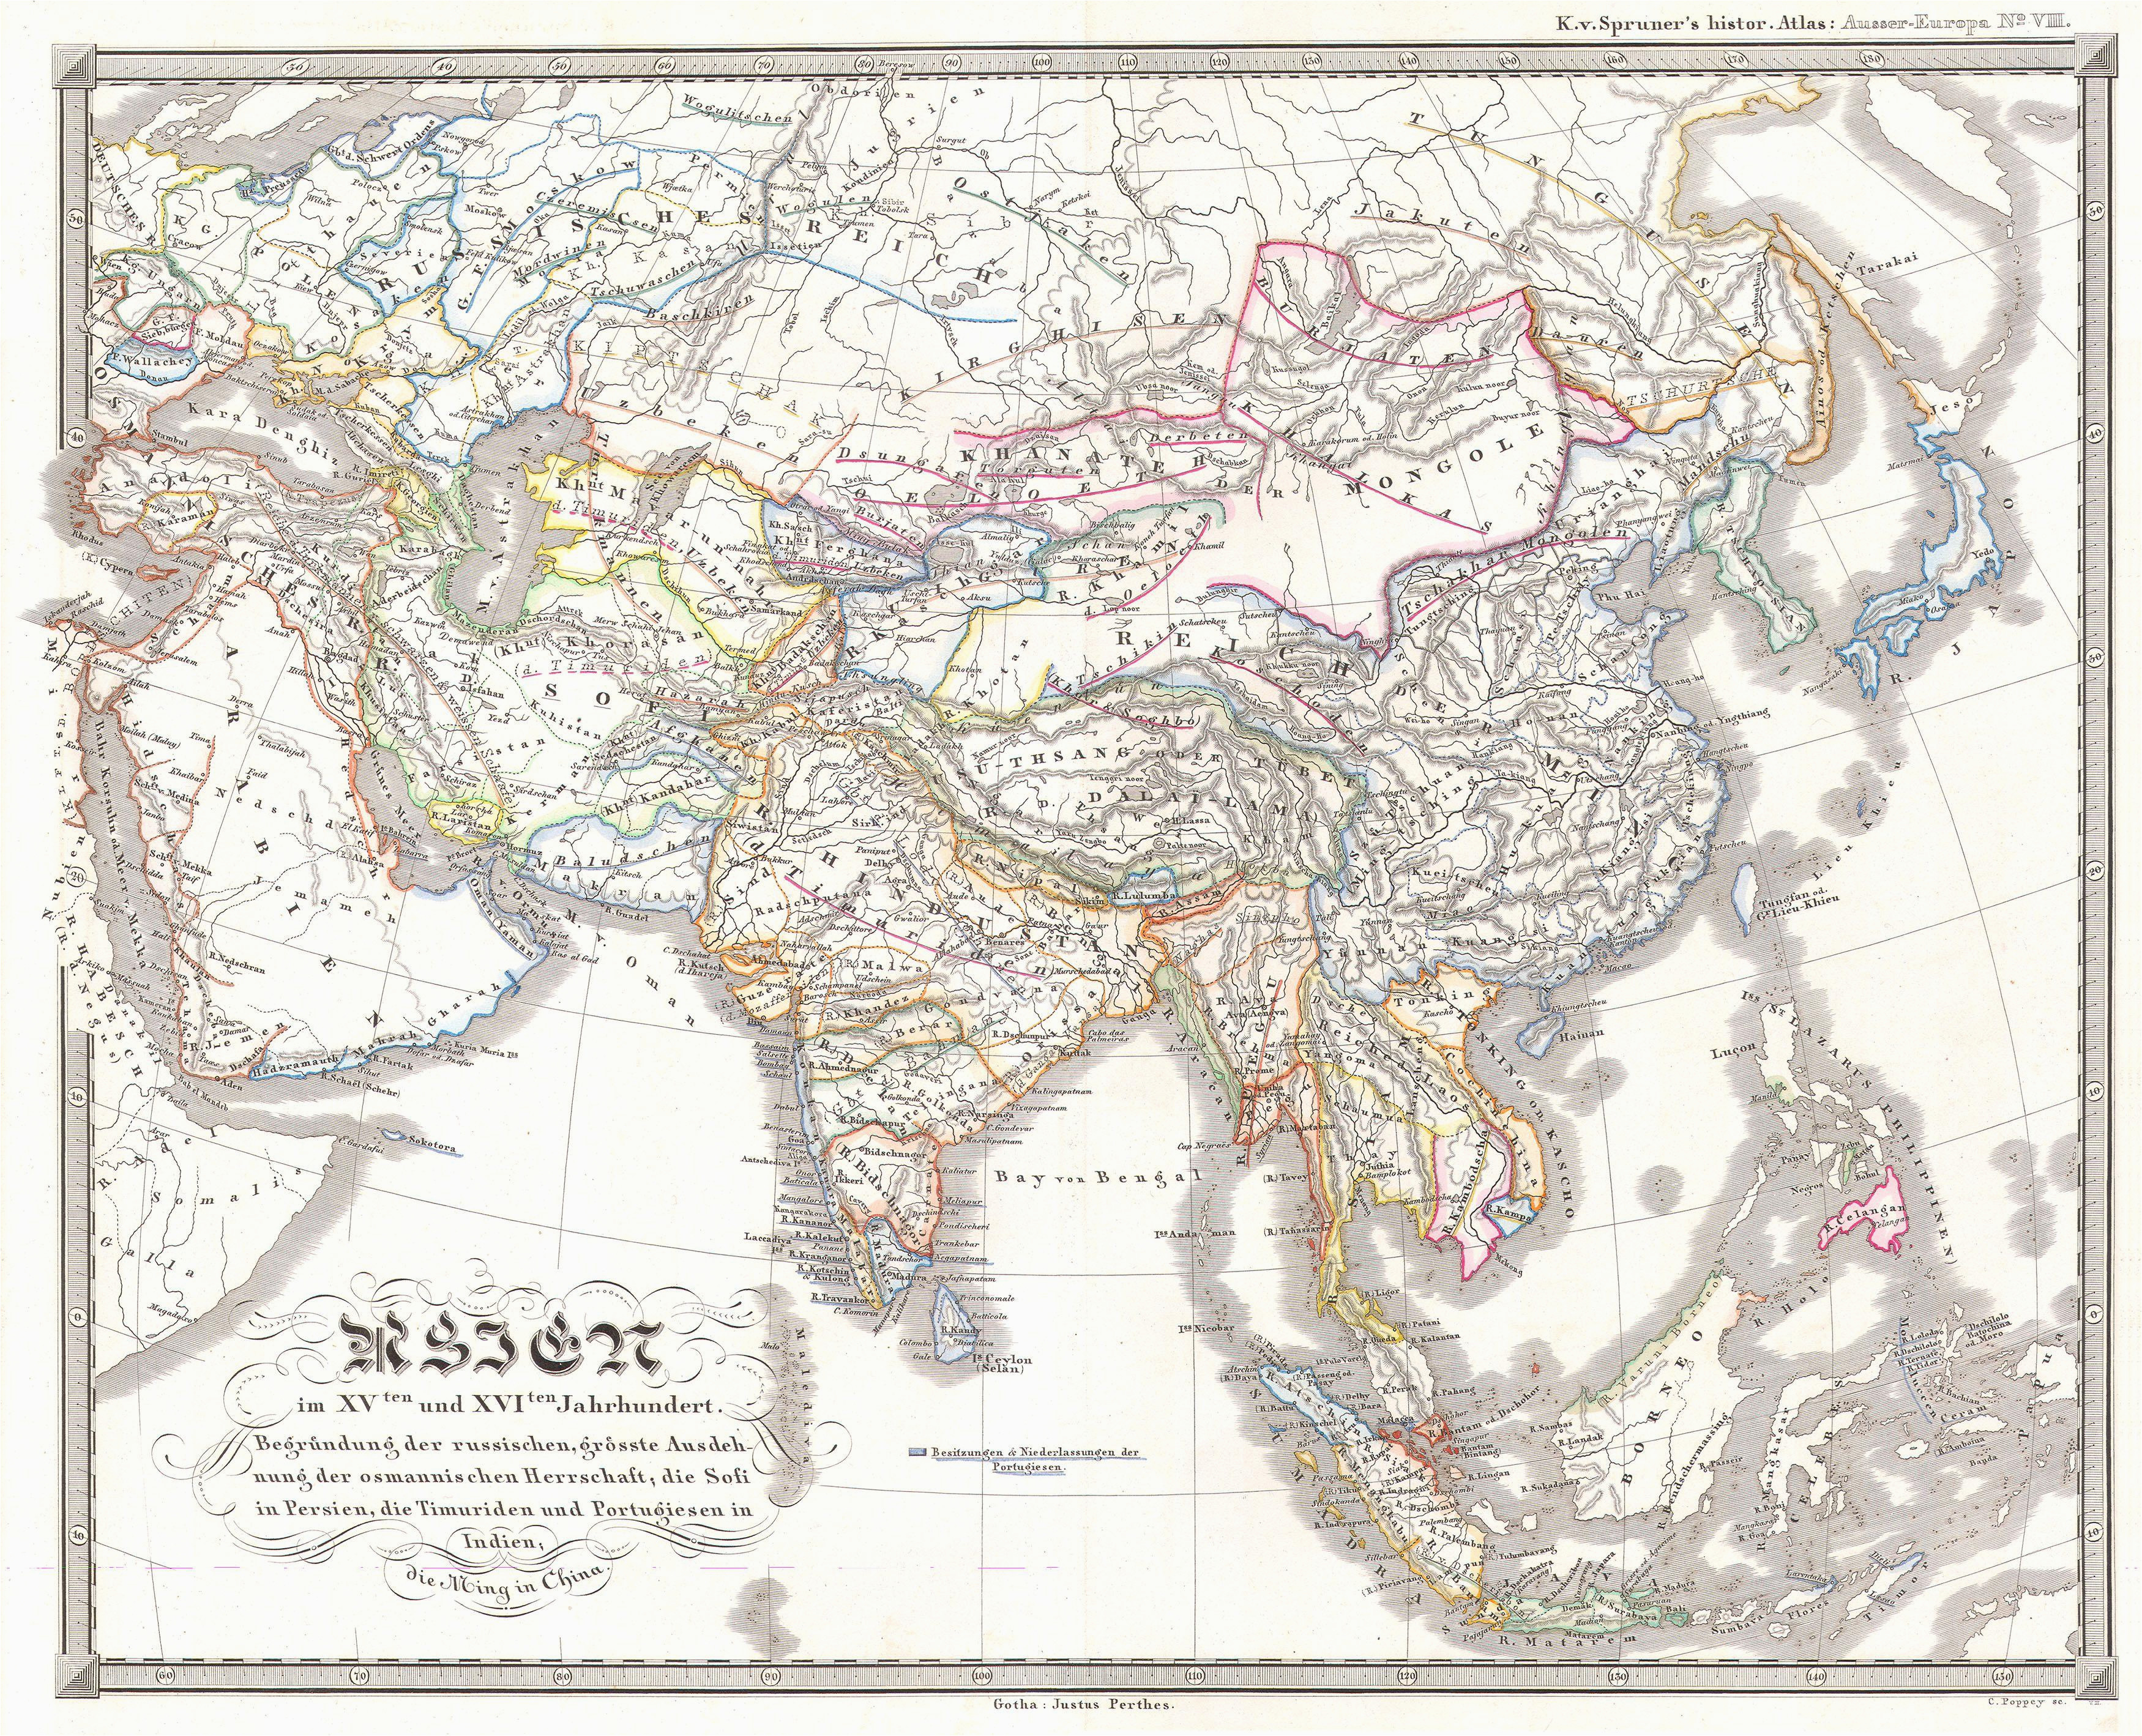 file 1844 spruneri map of asia in the 15th and 16th